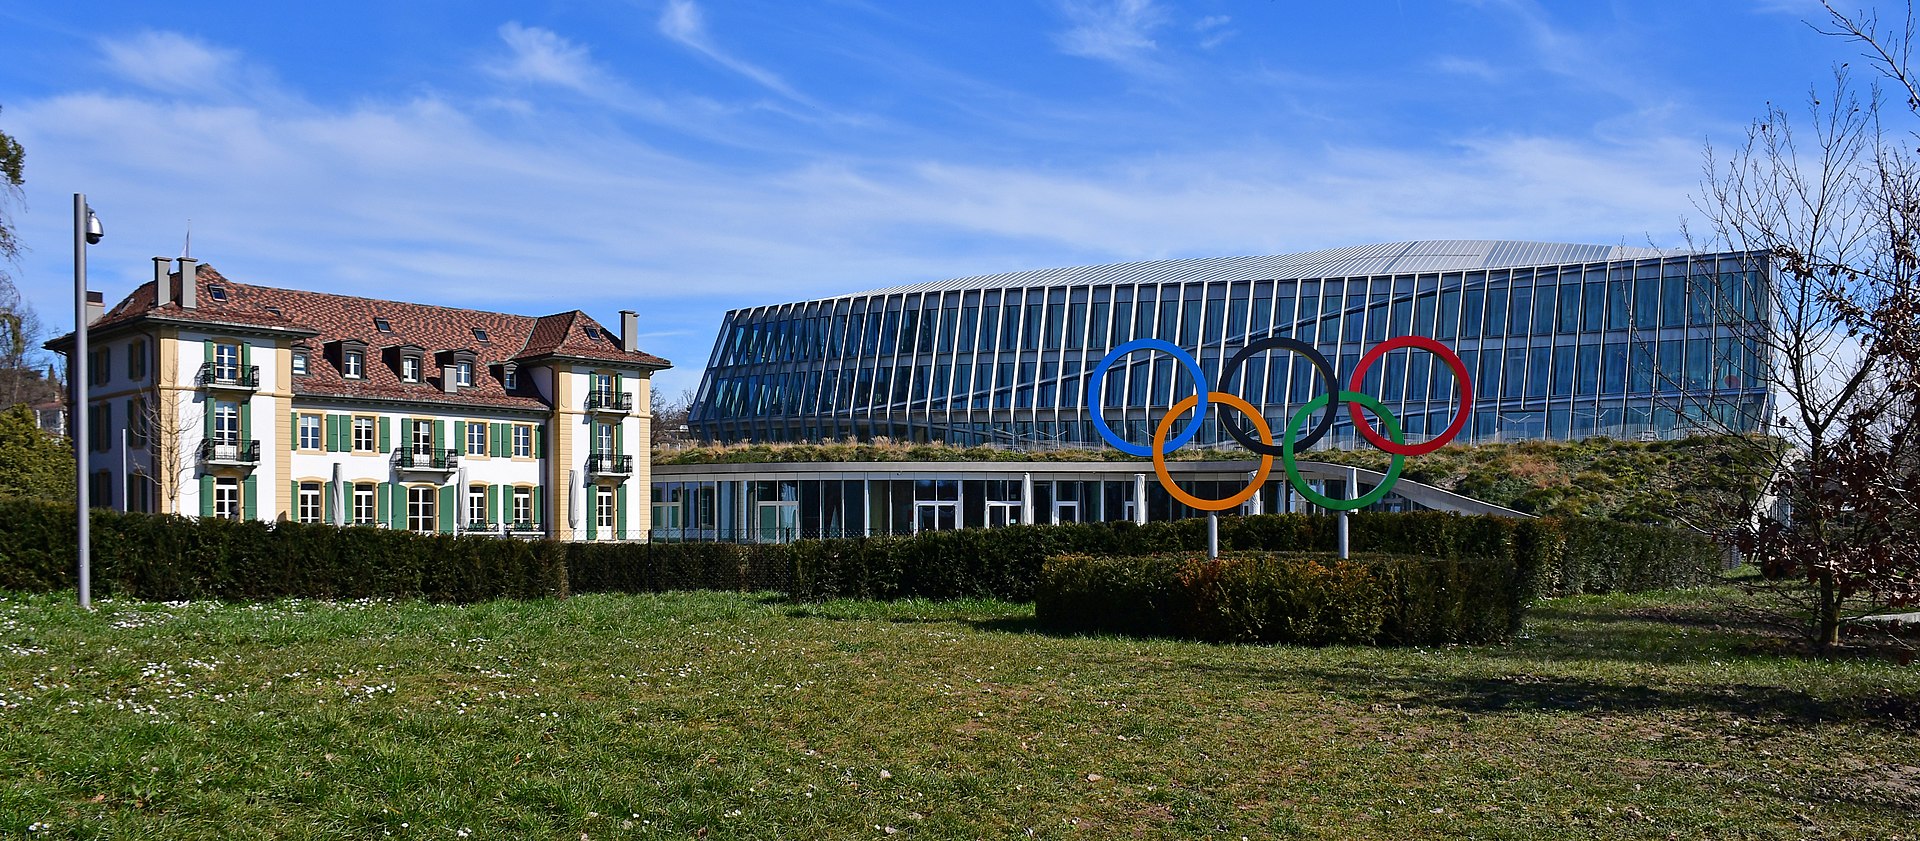 1920px-International Olympic Committee Headquarters (2)